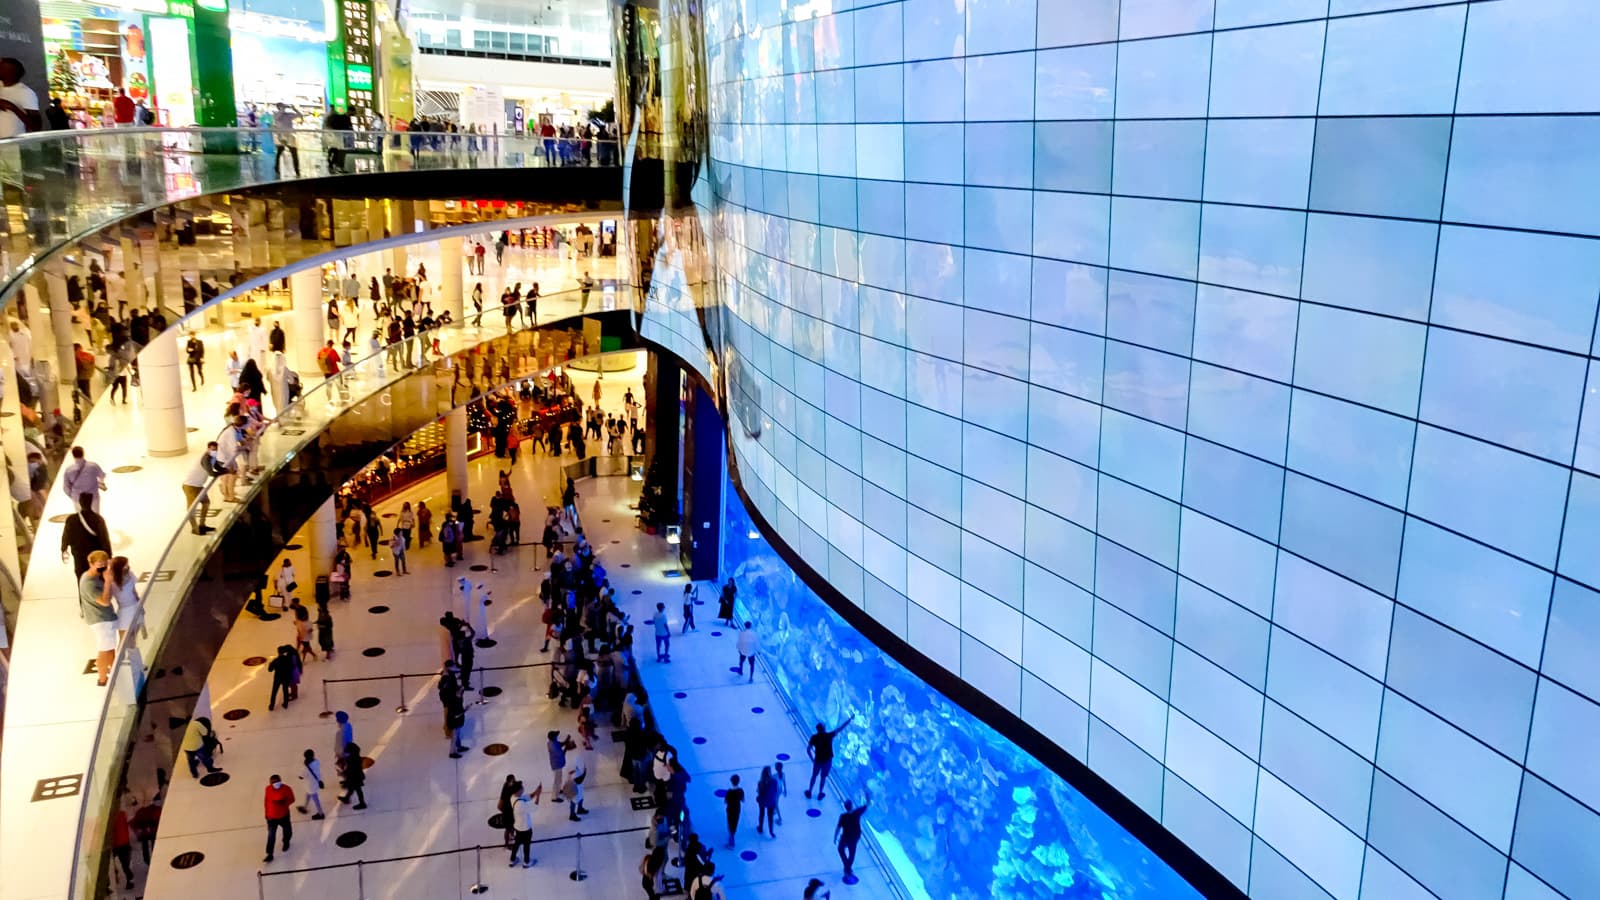 Dubai Mall tops the rating of popular attractions in Dubai